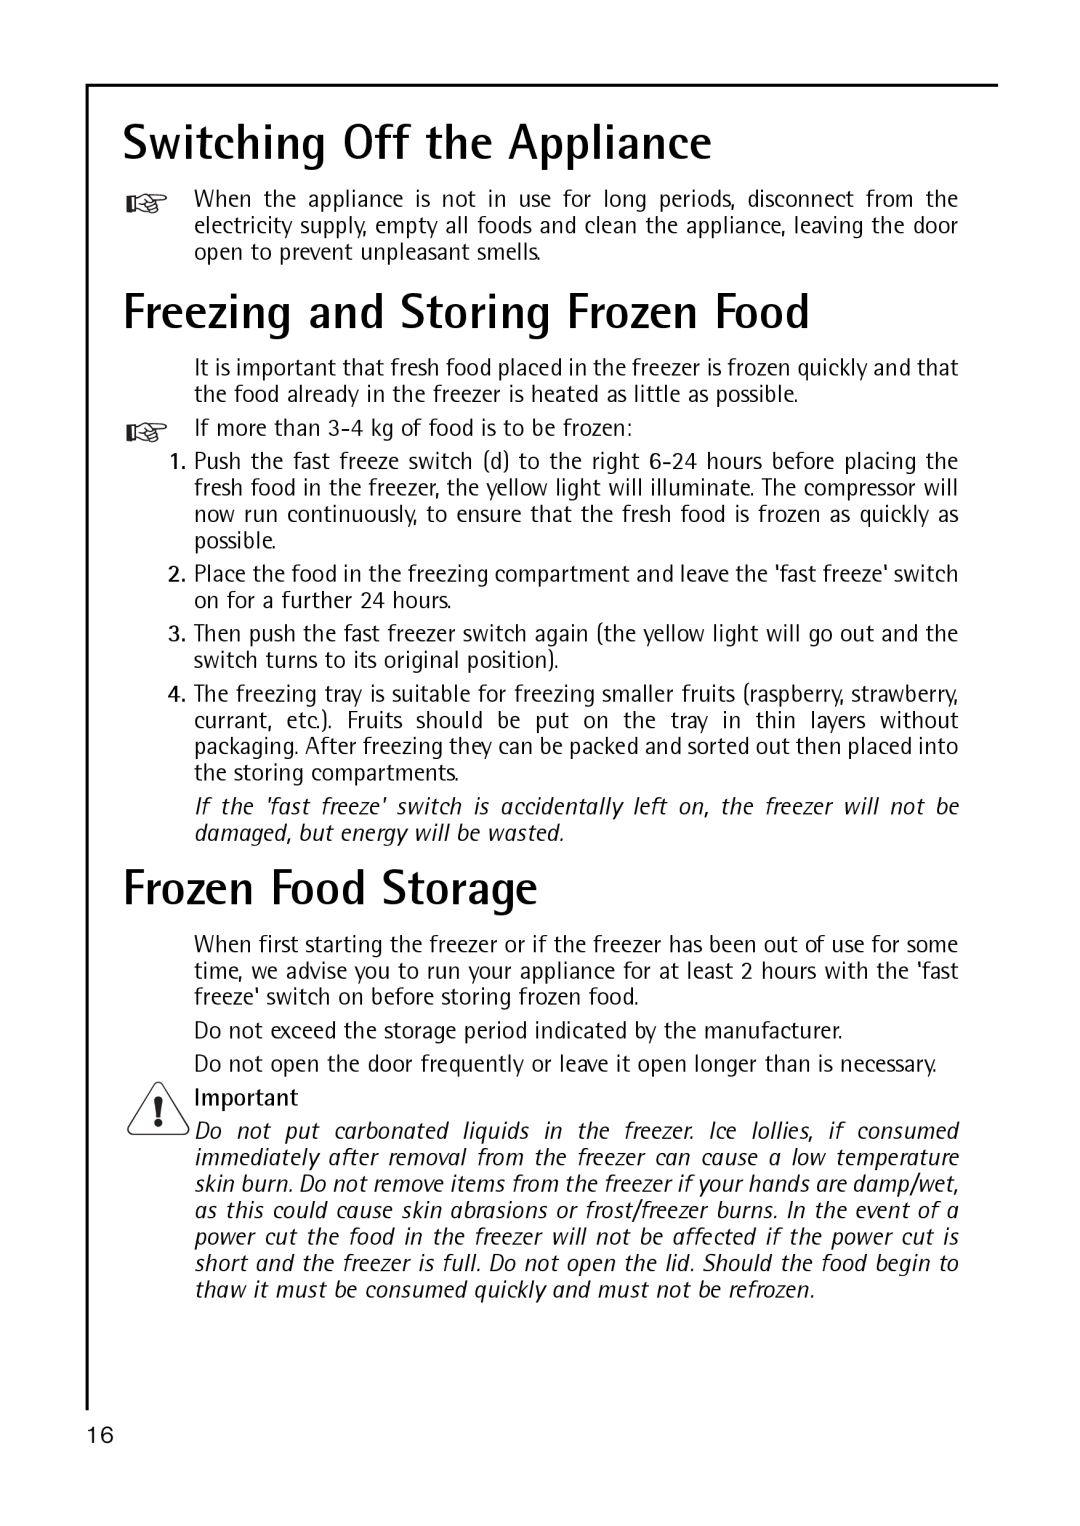 Electrolux A 40100 GS Switching Off the Appliance, Freezing and Storing Frozen Food, Frozen Food Storage 